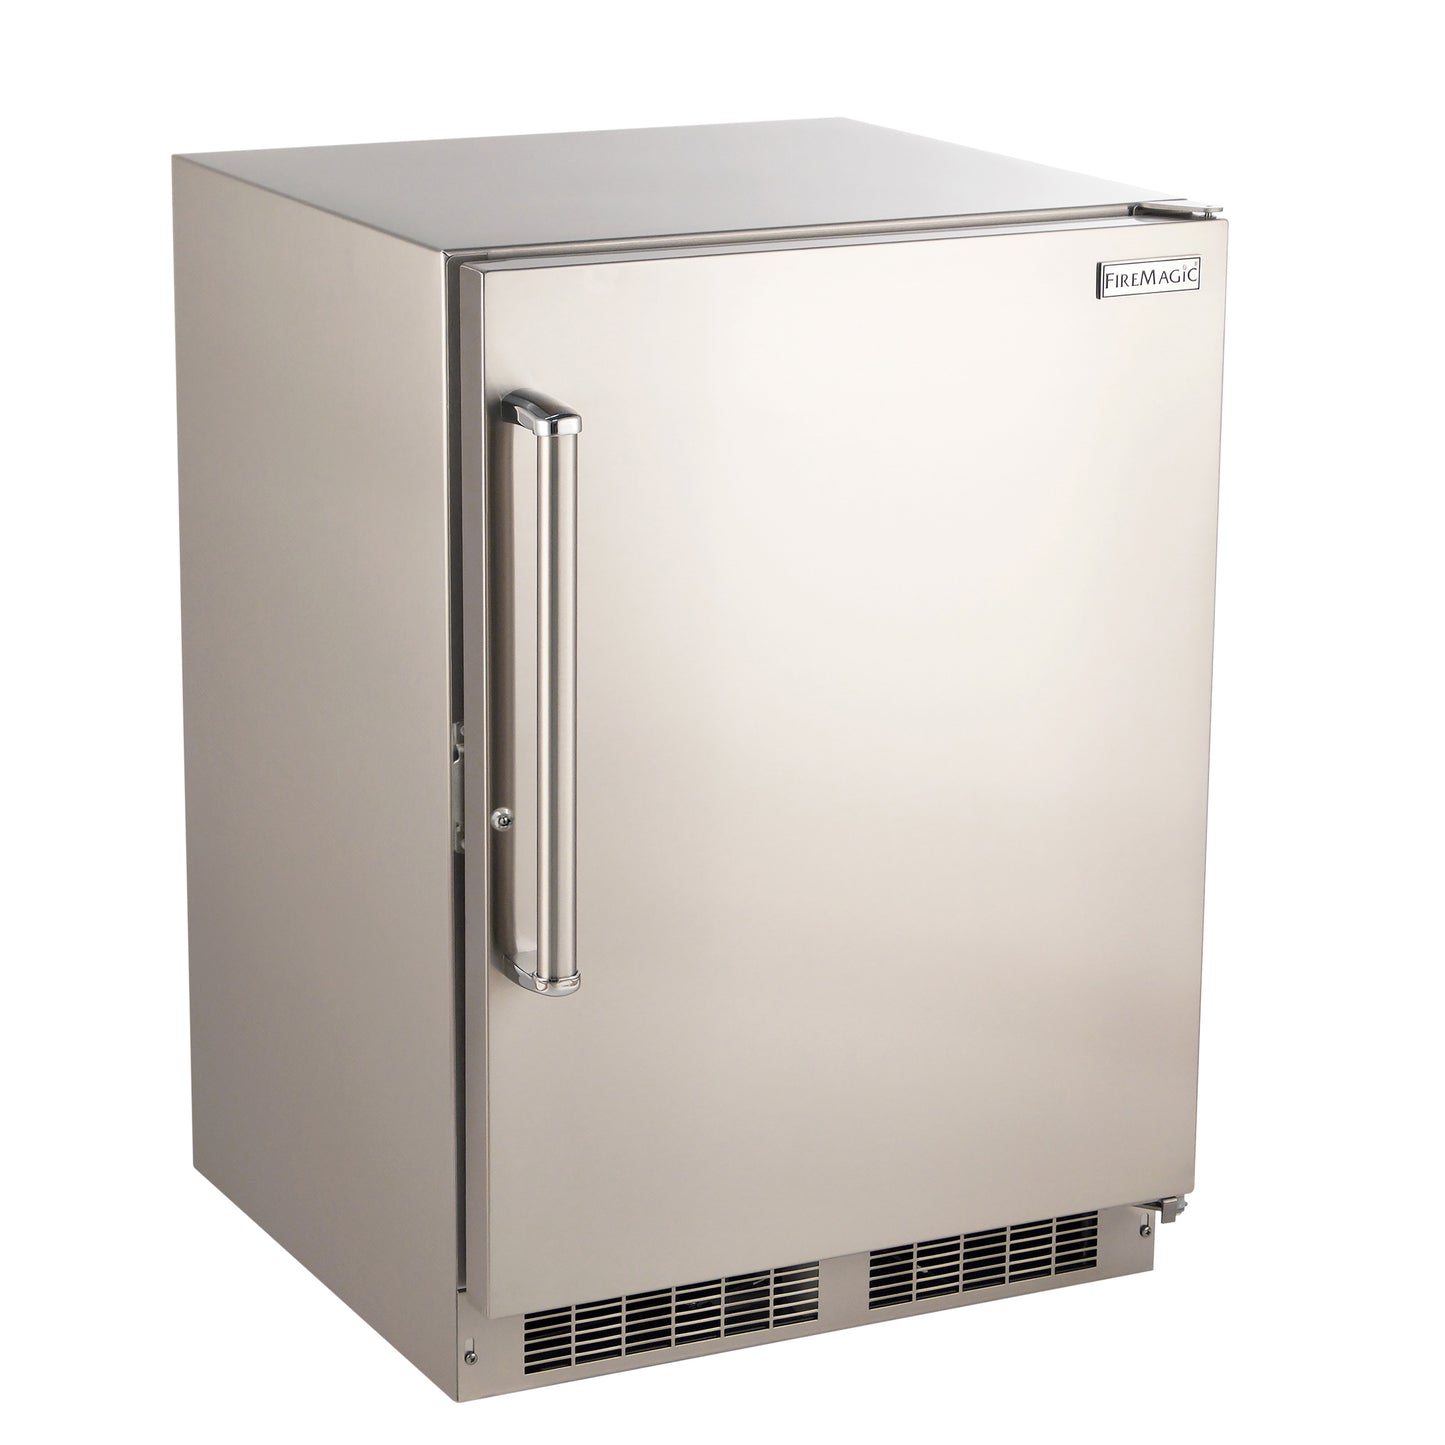 FireMagic Outdoor Rated Refrigerator